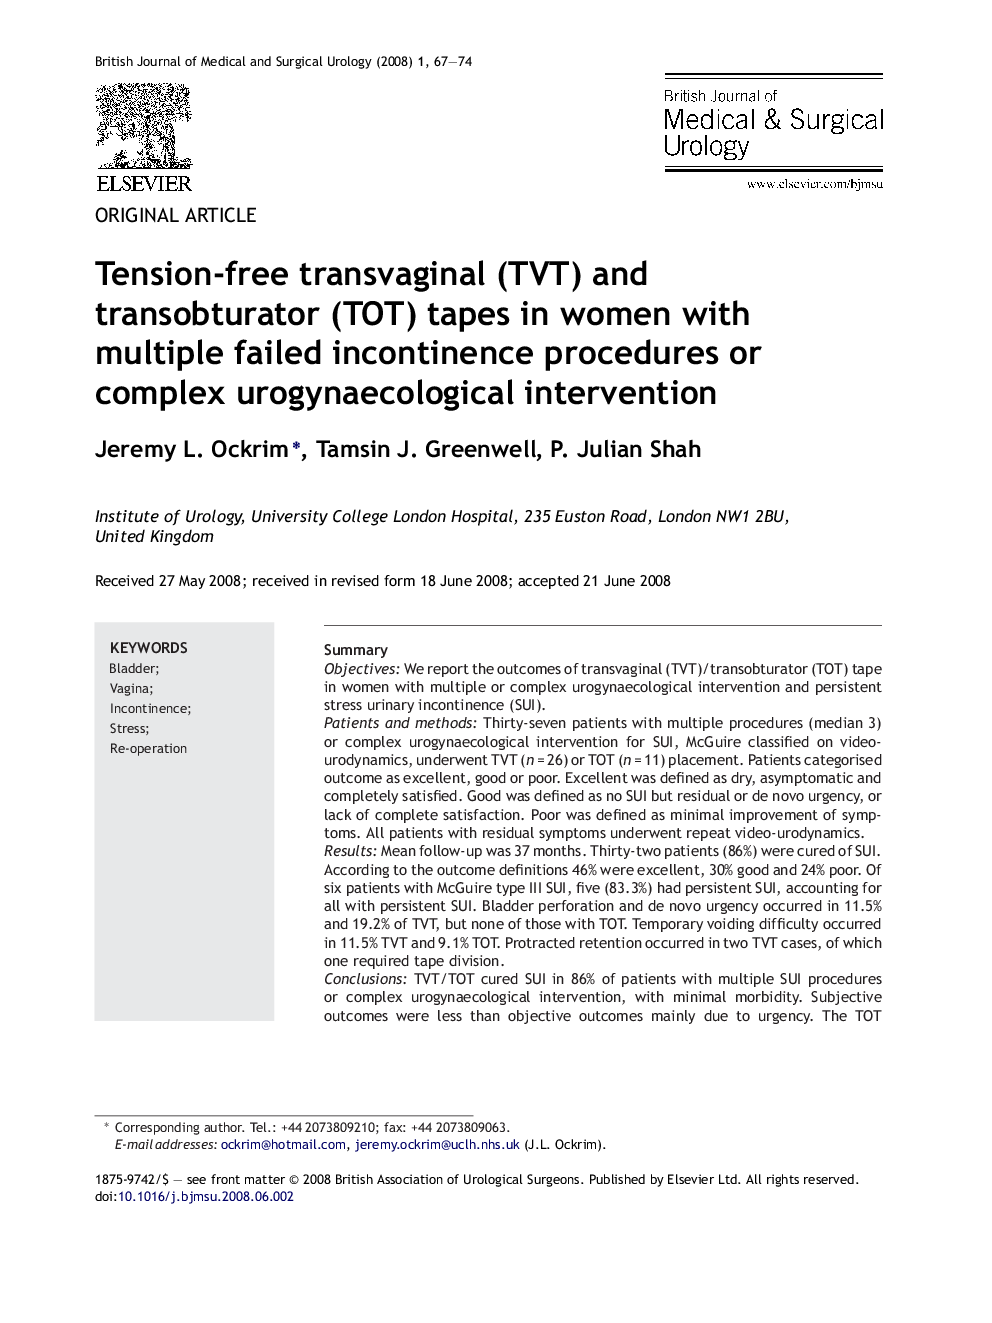 Tension-free transvaginal (TVT) and transobturator (TOT) tapes in women with multiple failed incontinence procedures or complex urogynaecological intervention